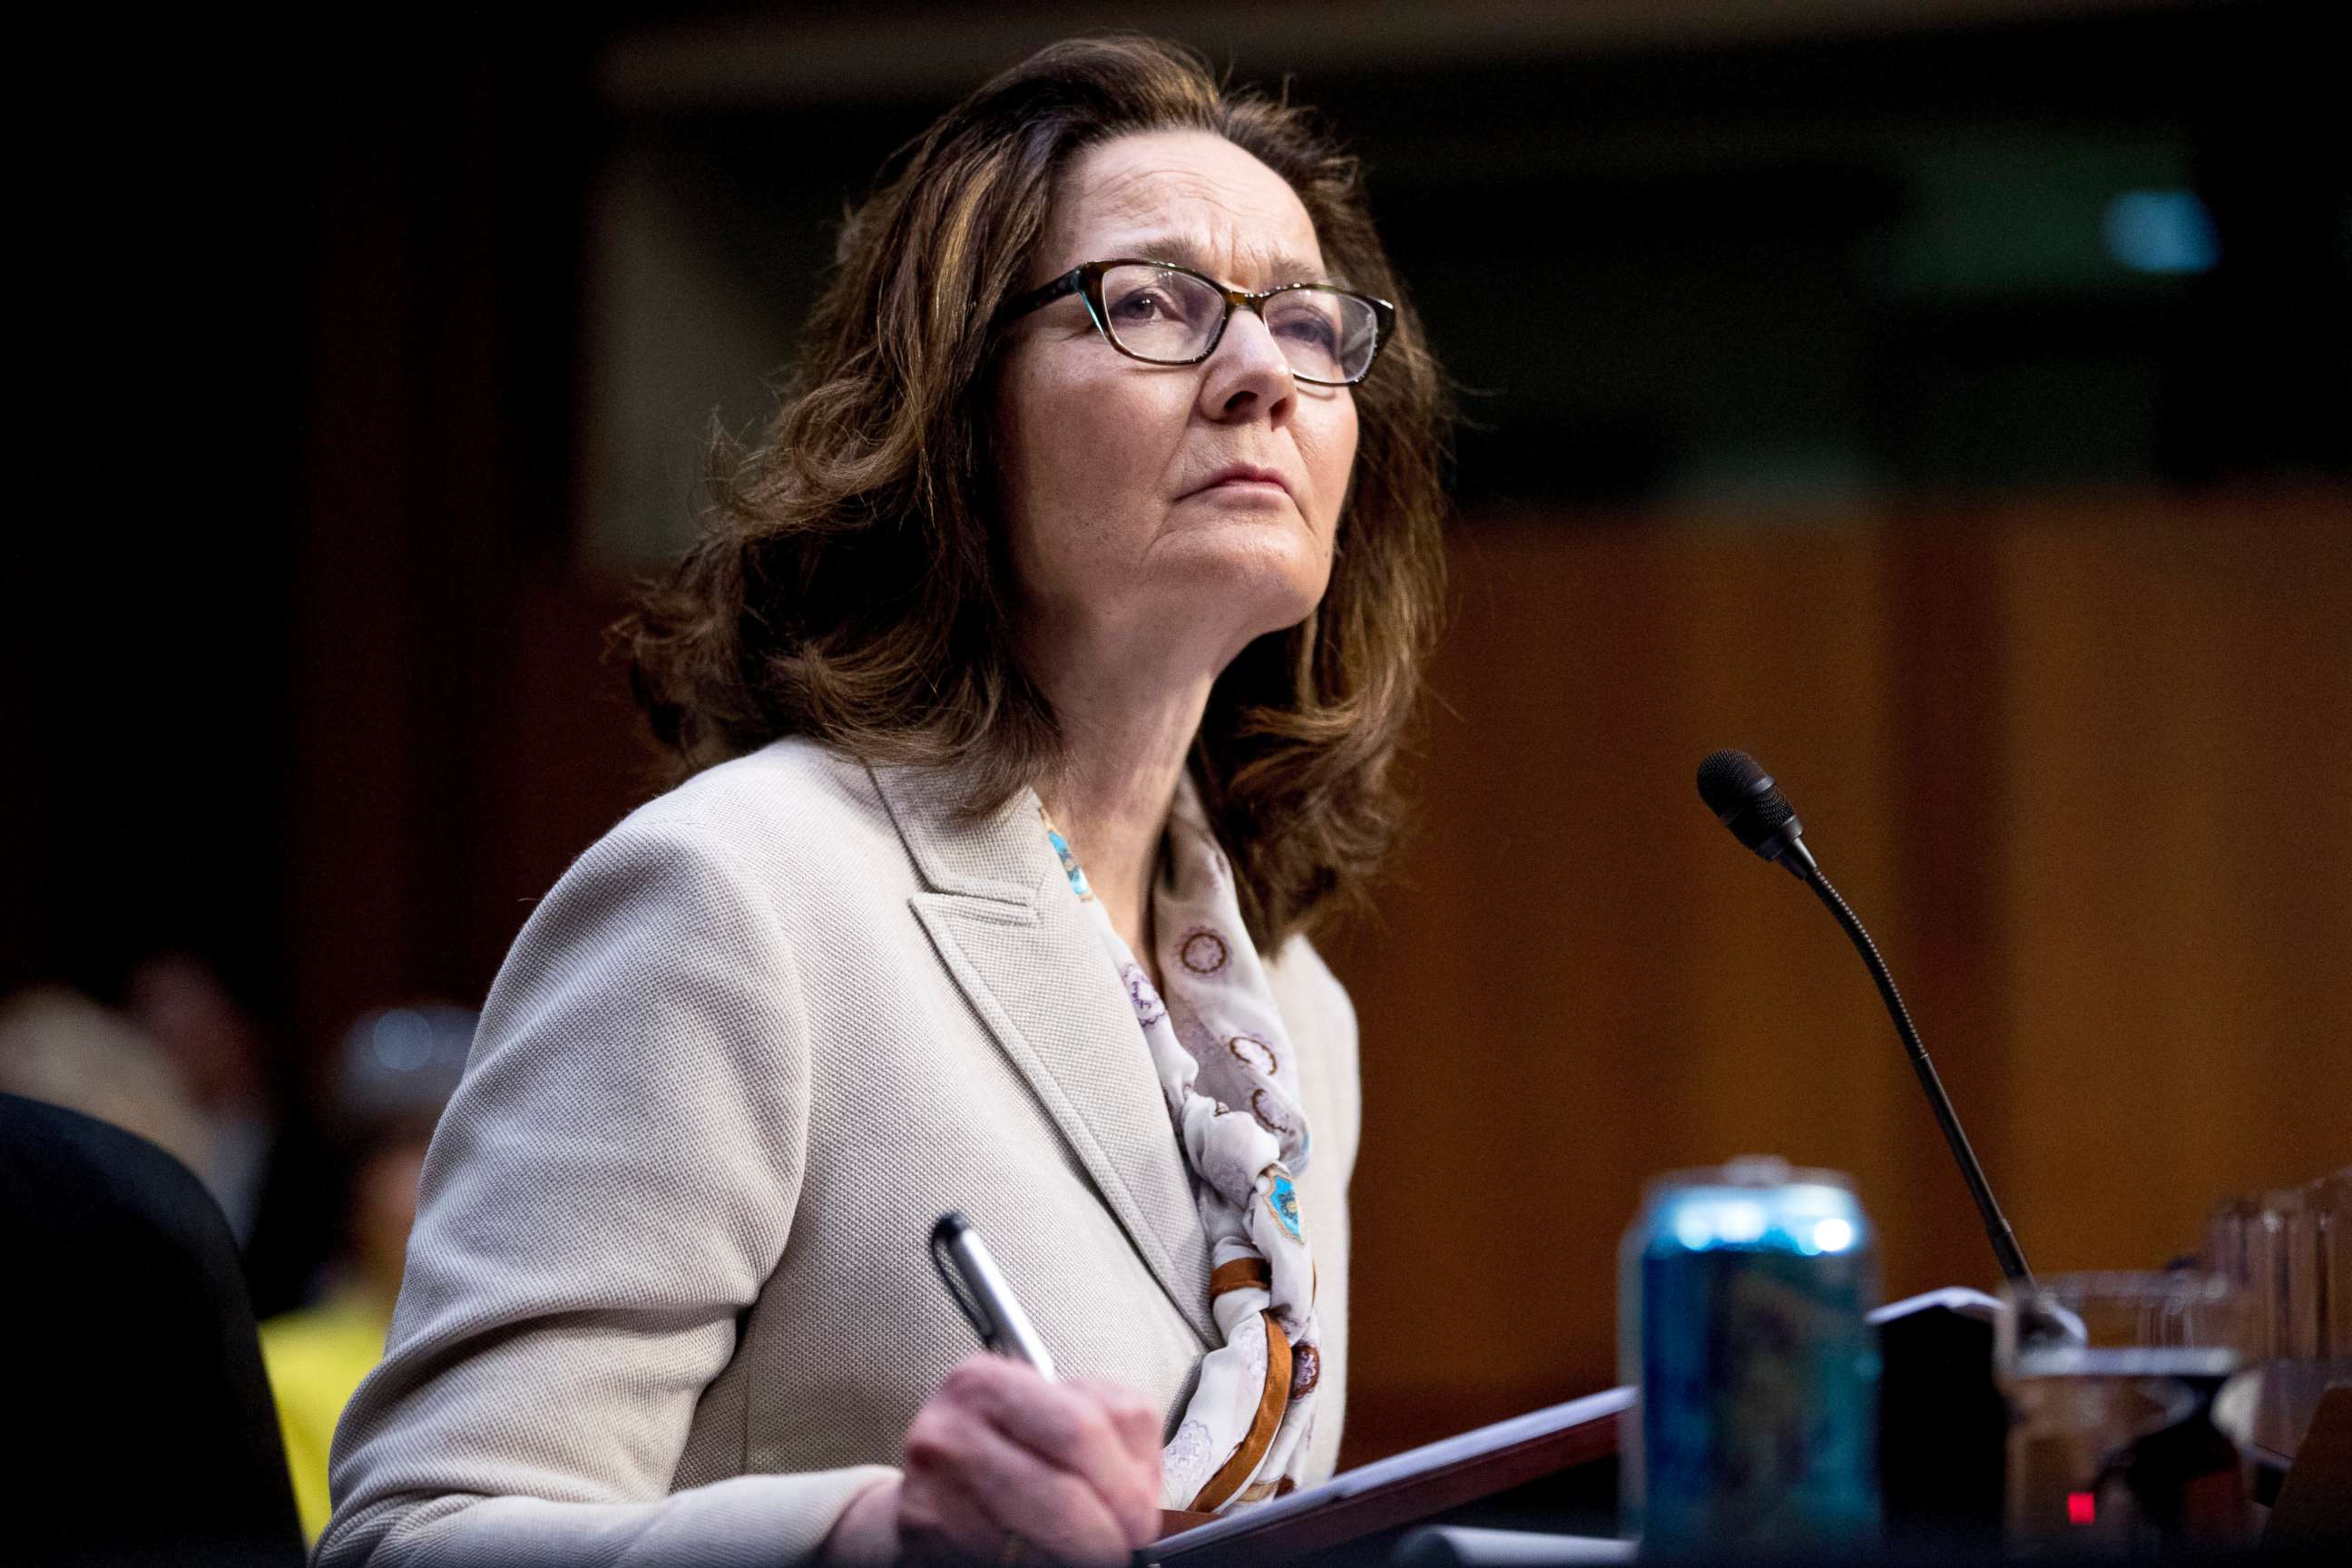 PHOTO: Gina Haspel, President Donald Trump's pick to lead the Central Intelligence Agency, pauses while testifying at her confirmation hearing before the Senate Intelligence Committee, on Capitol Hill, May 9, 2018, in Washington.